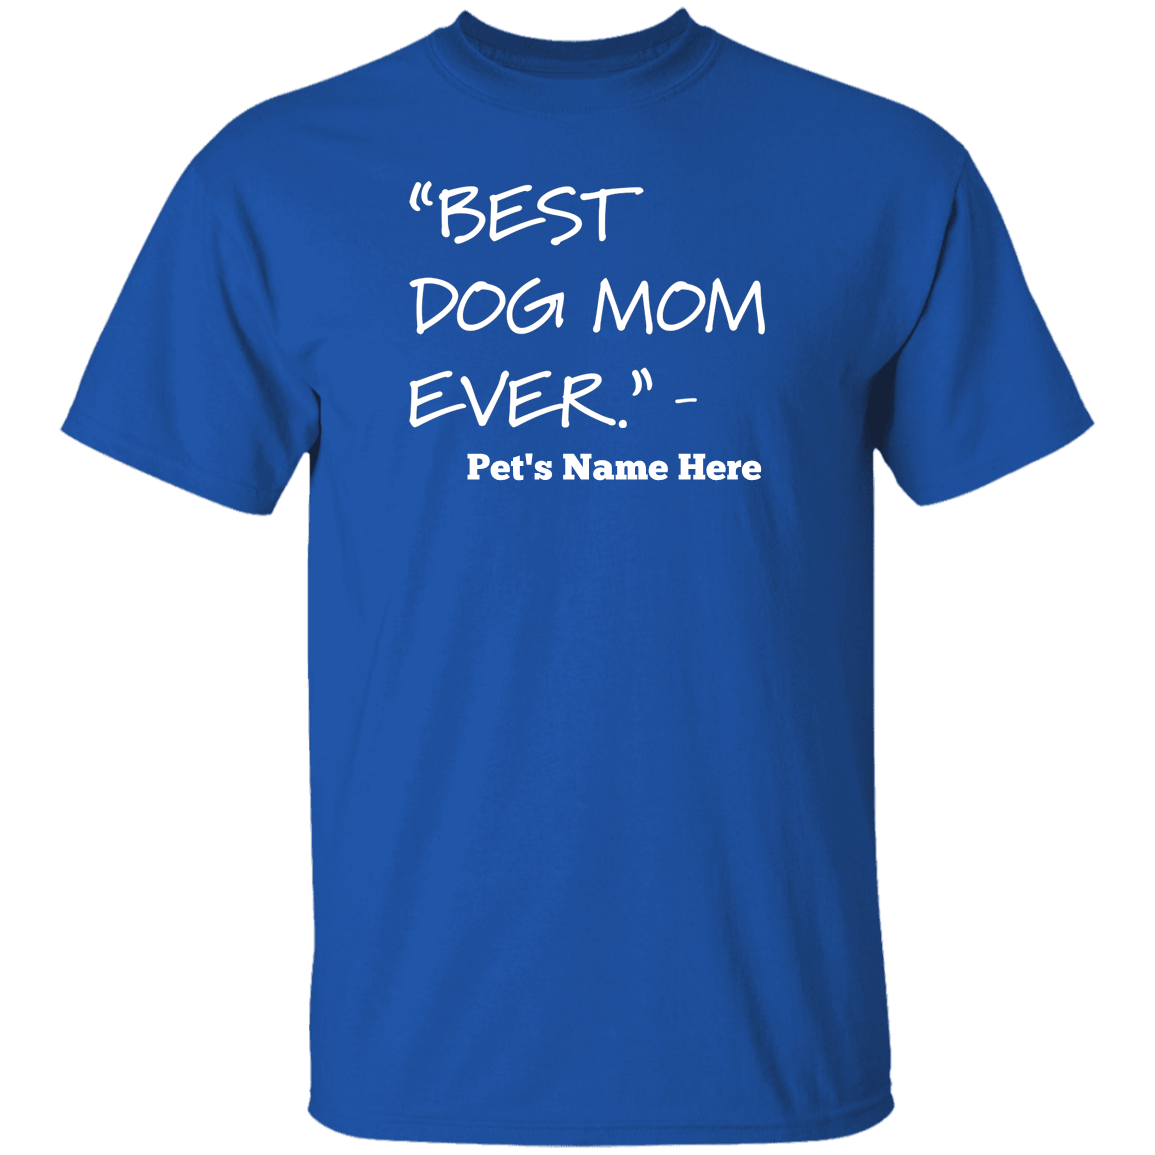 Personalized Best Dog Mom Ever - T Shirt.